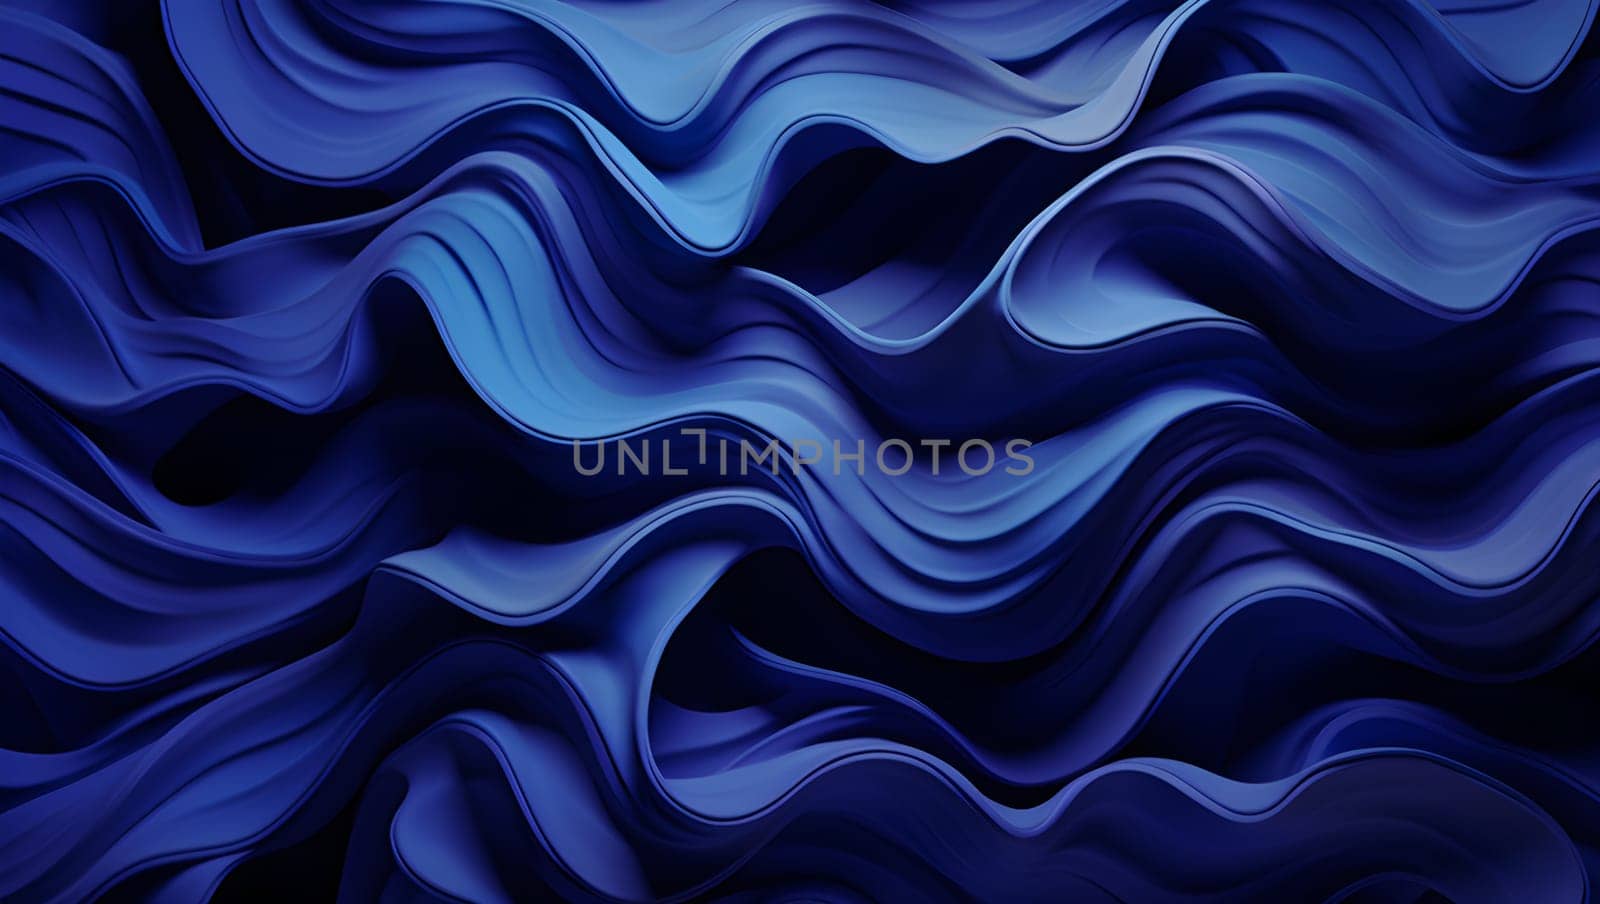 Blue waves made of fabric. Beautiful abstract background. High quality illustration